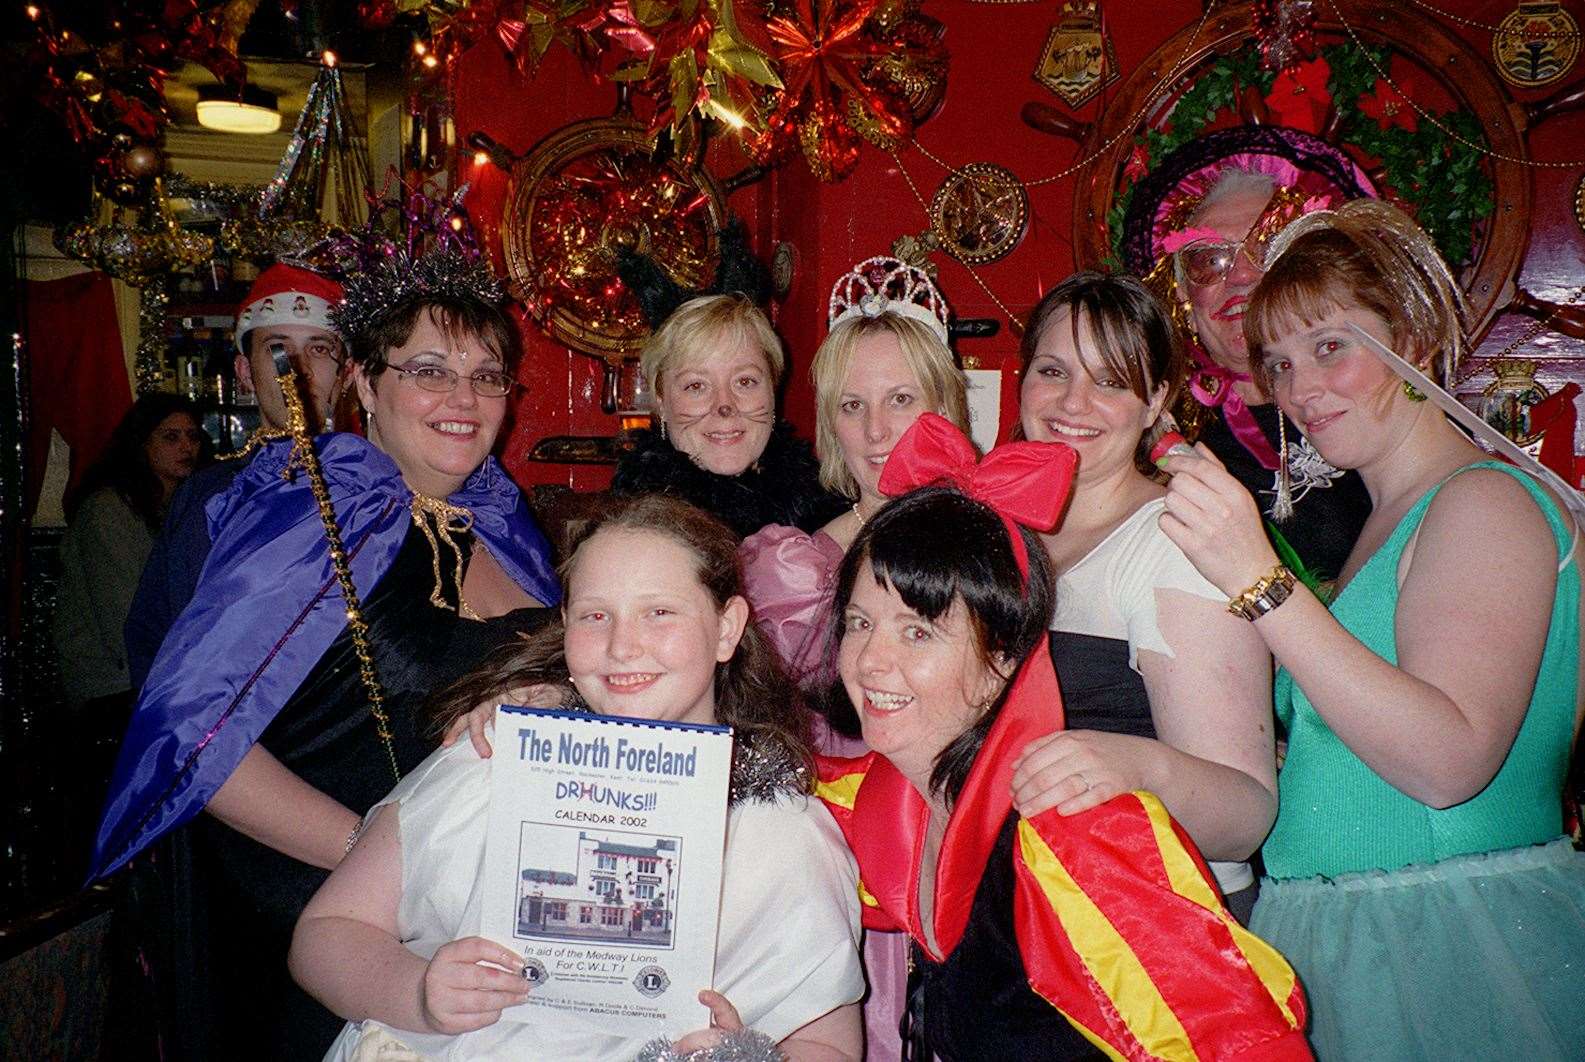 Charity night at The North Foreland pub in Rochester in December 2001. Supporters of the Lions Club and pub regulars are pictured in fancy dress. It was one of Medway's best-known pubs but sadly closed for good in 2013